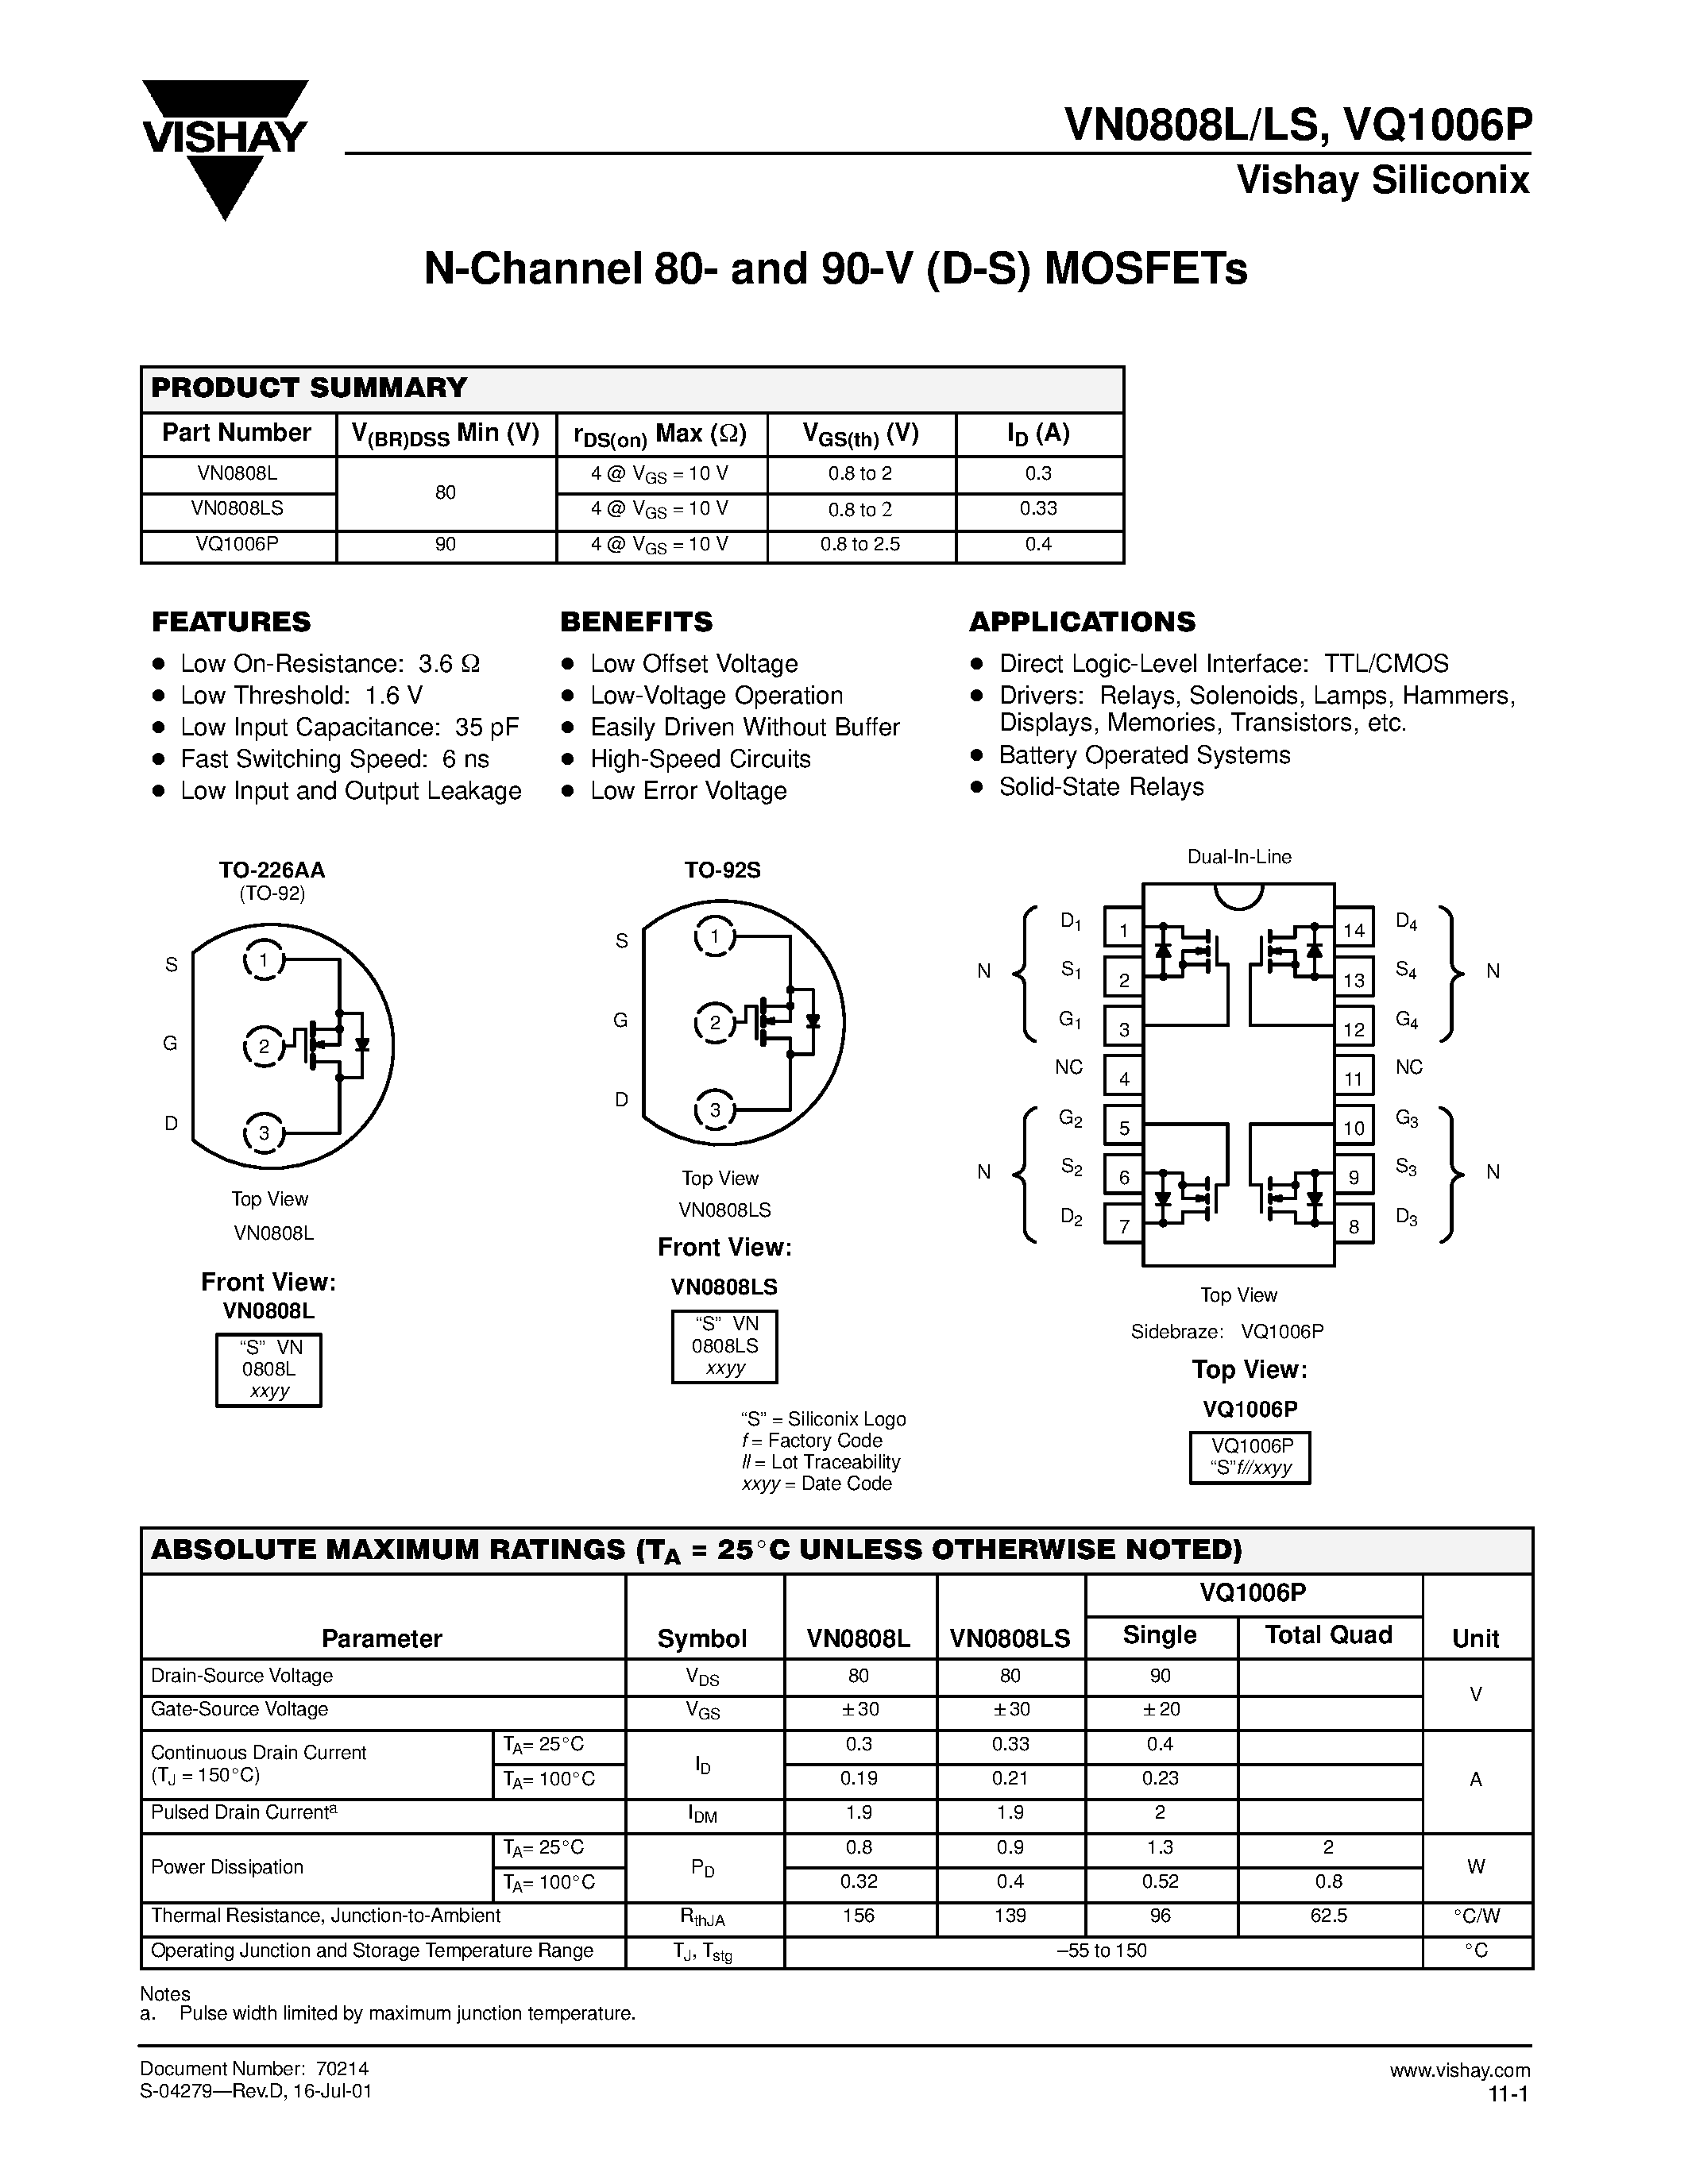 Даташит VQ1006P - N-Channel 80- and 90-V (D-S) MOSFETs страница 1